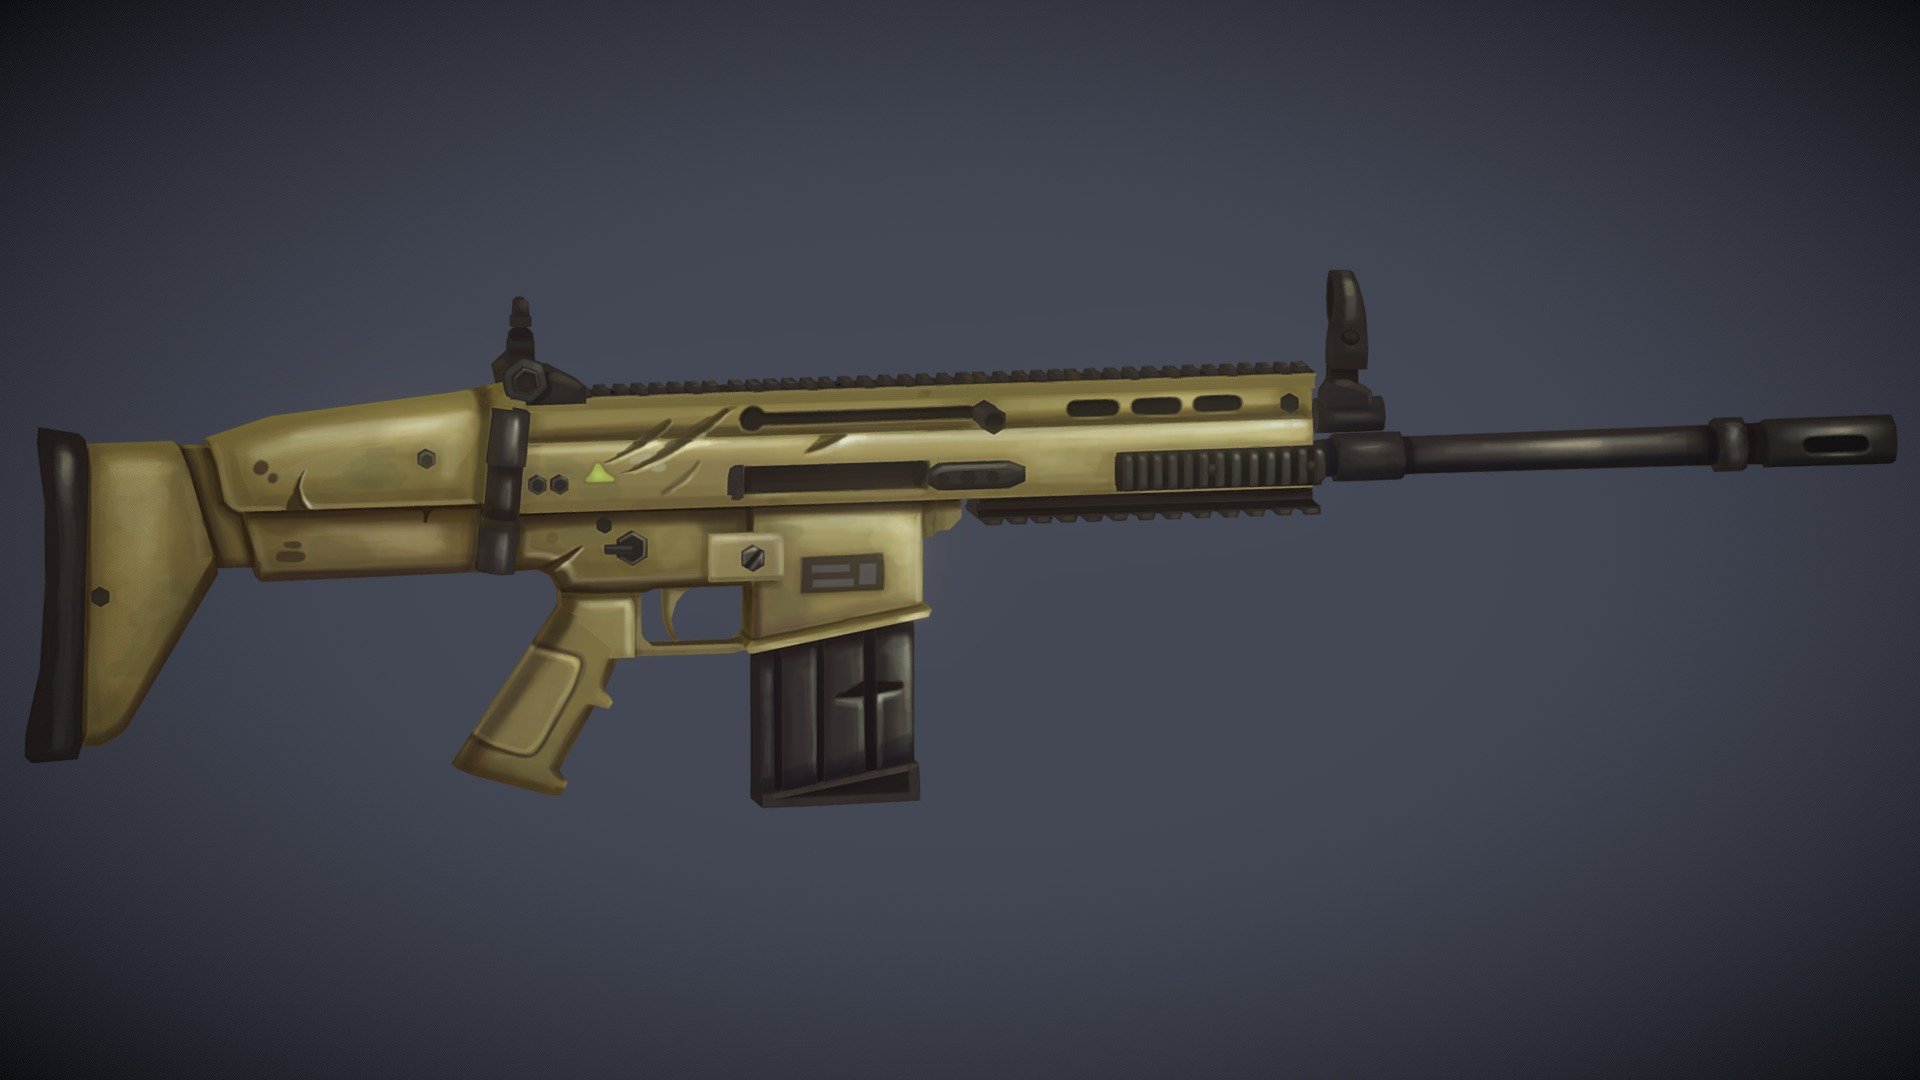 This is my latest personal project. Stylized Low Poly  FN SCAR H. Gun made for a pack of guns fbx files and 2048x2048px texture modeling with blender and texturing 3dcoat and photoshop

Buy and enjoy! 3d model